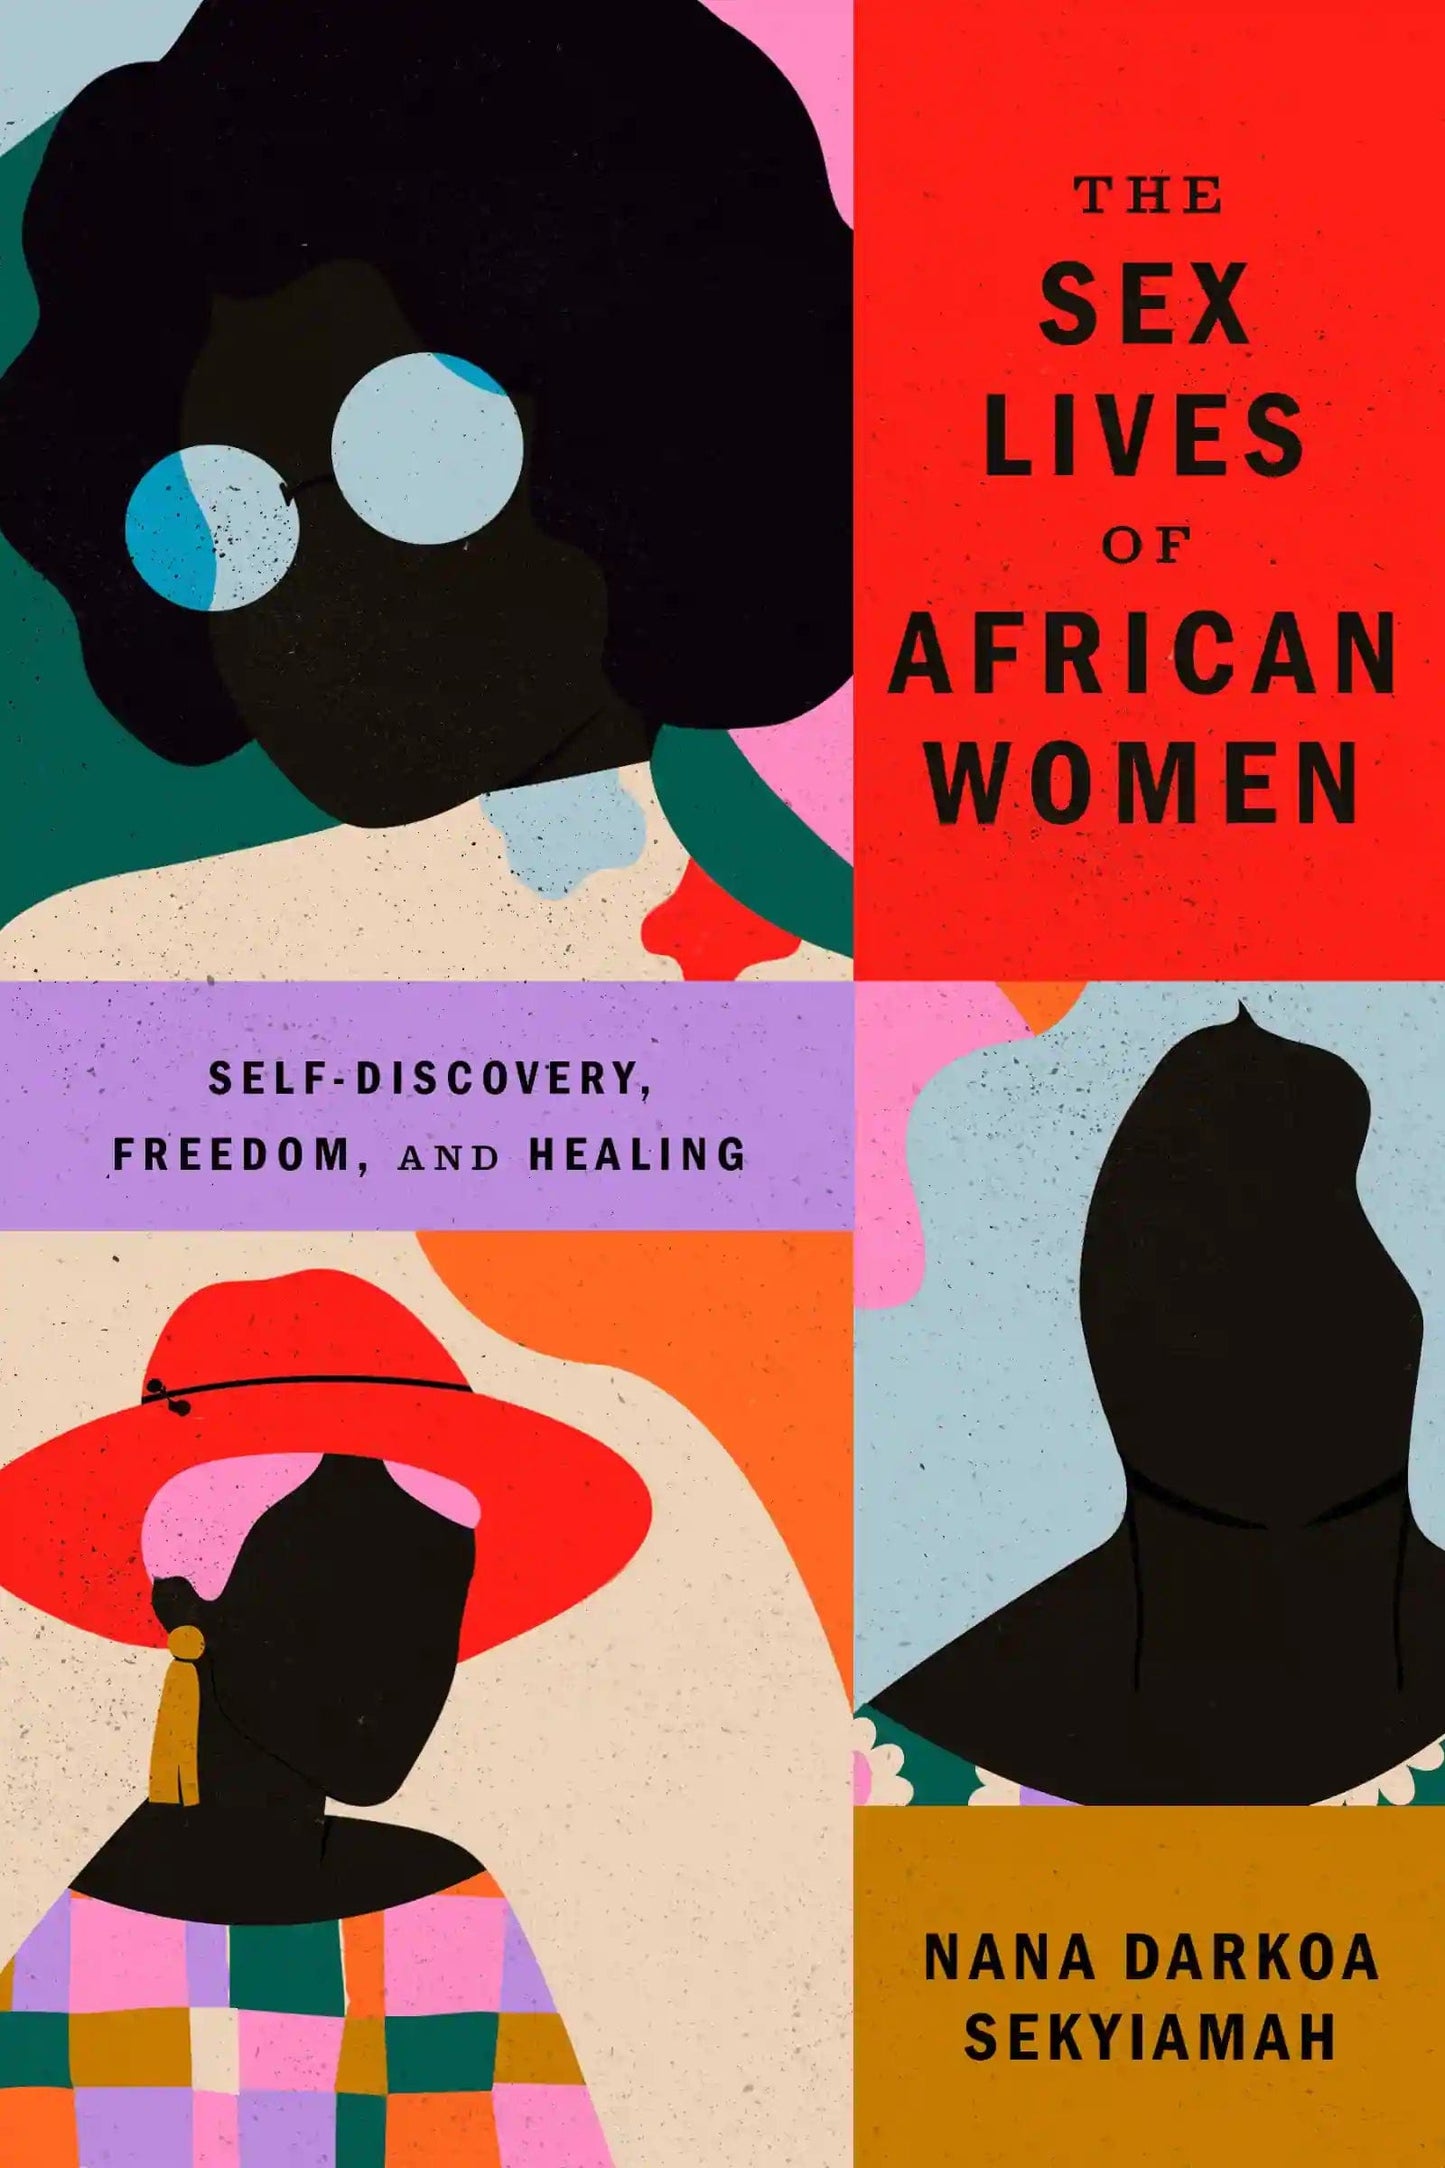 penguin The Sex Lives of African Women Self-Discovery, Freedom, and Healing by Nana Darkoa Sekyiamah